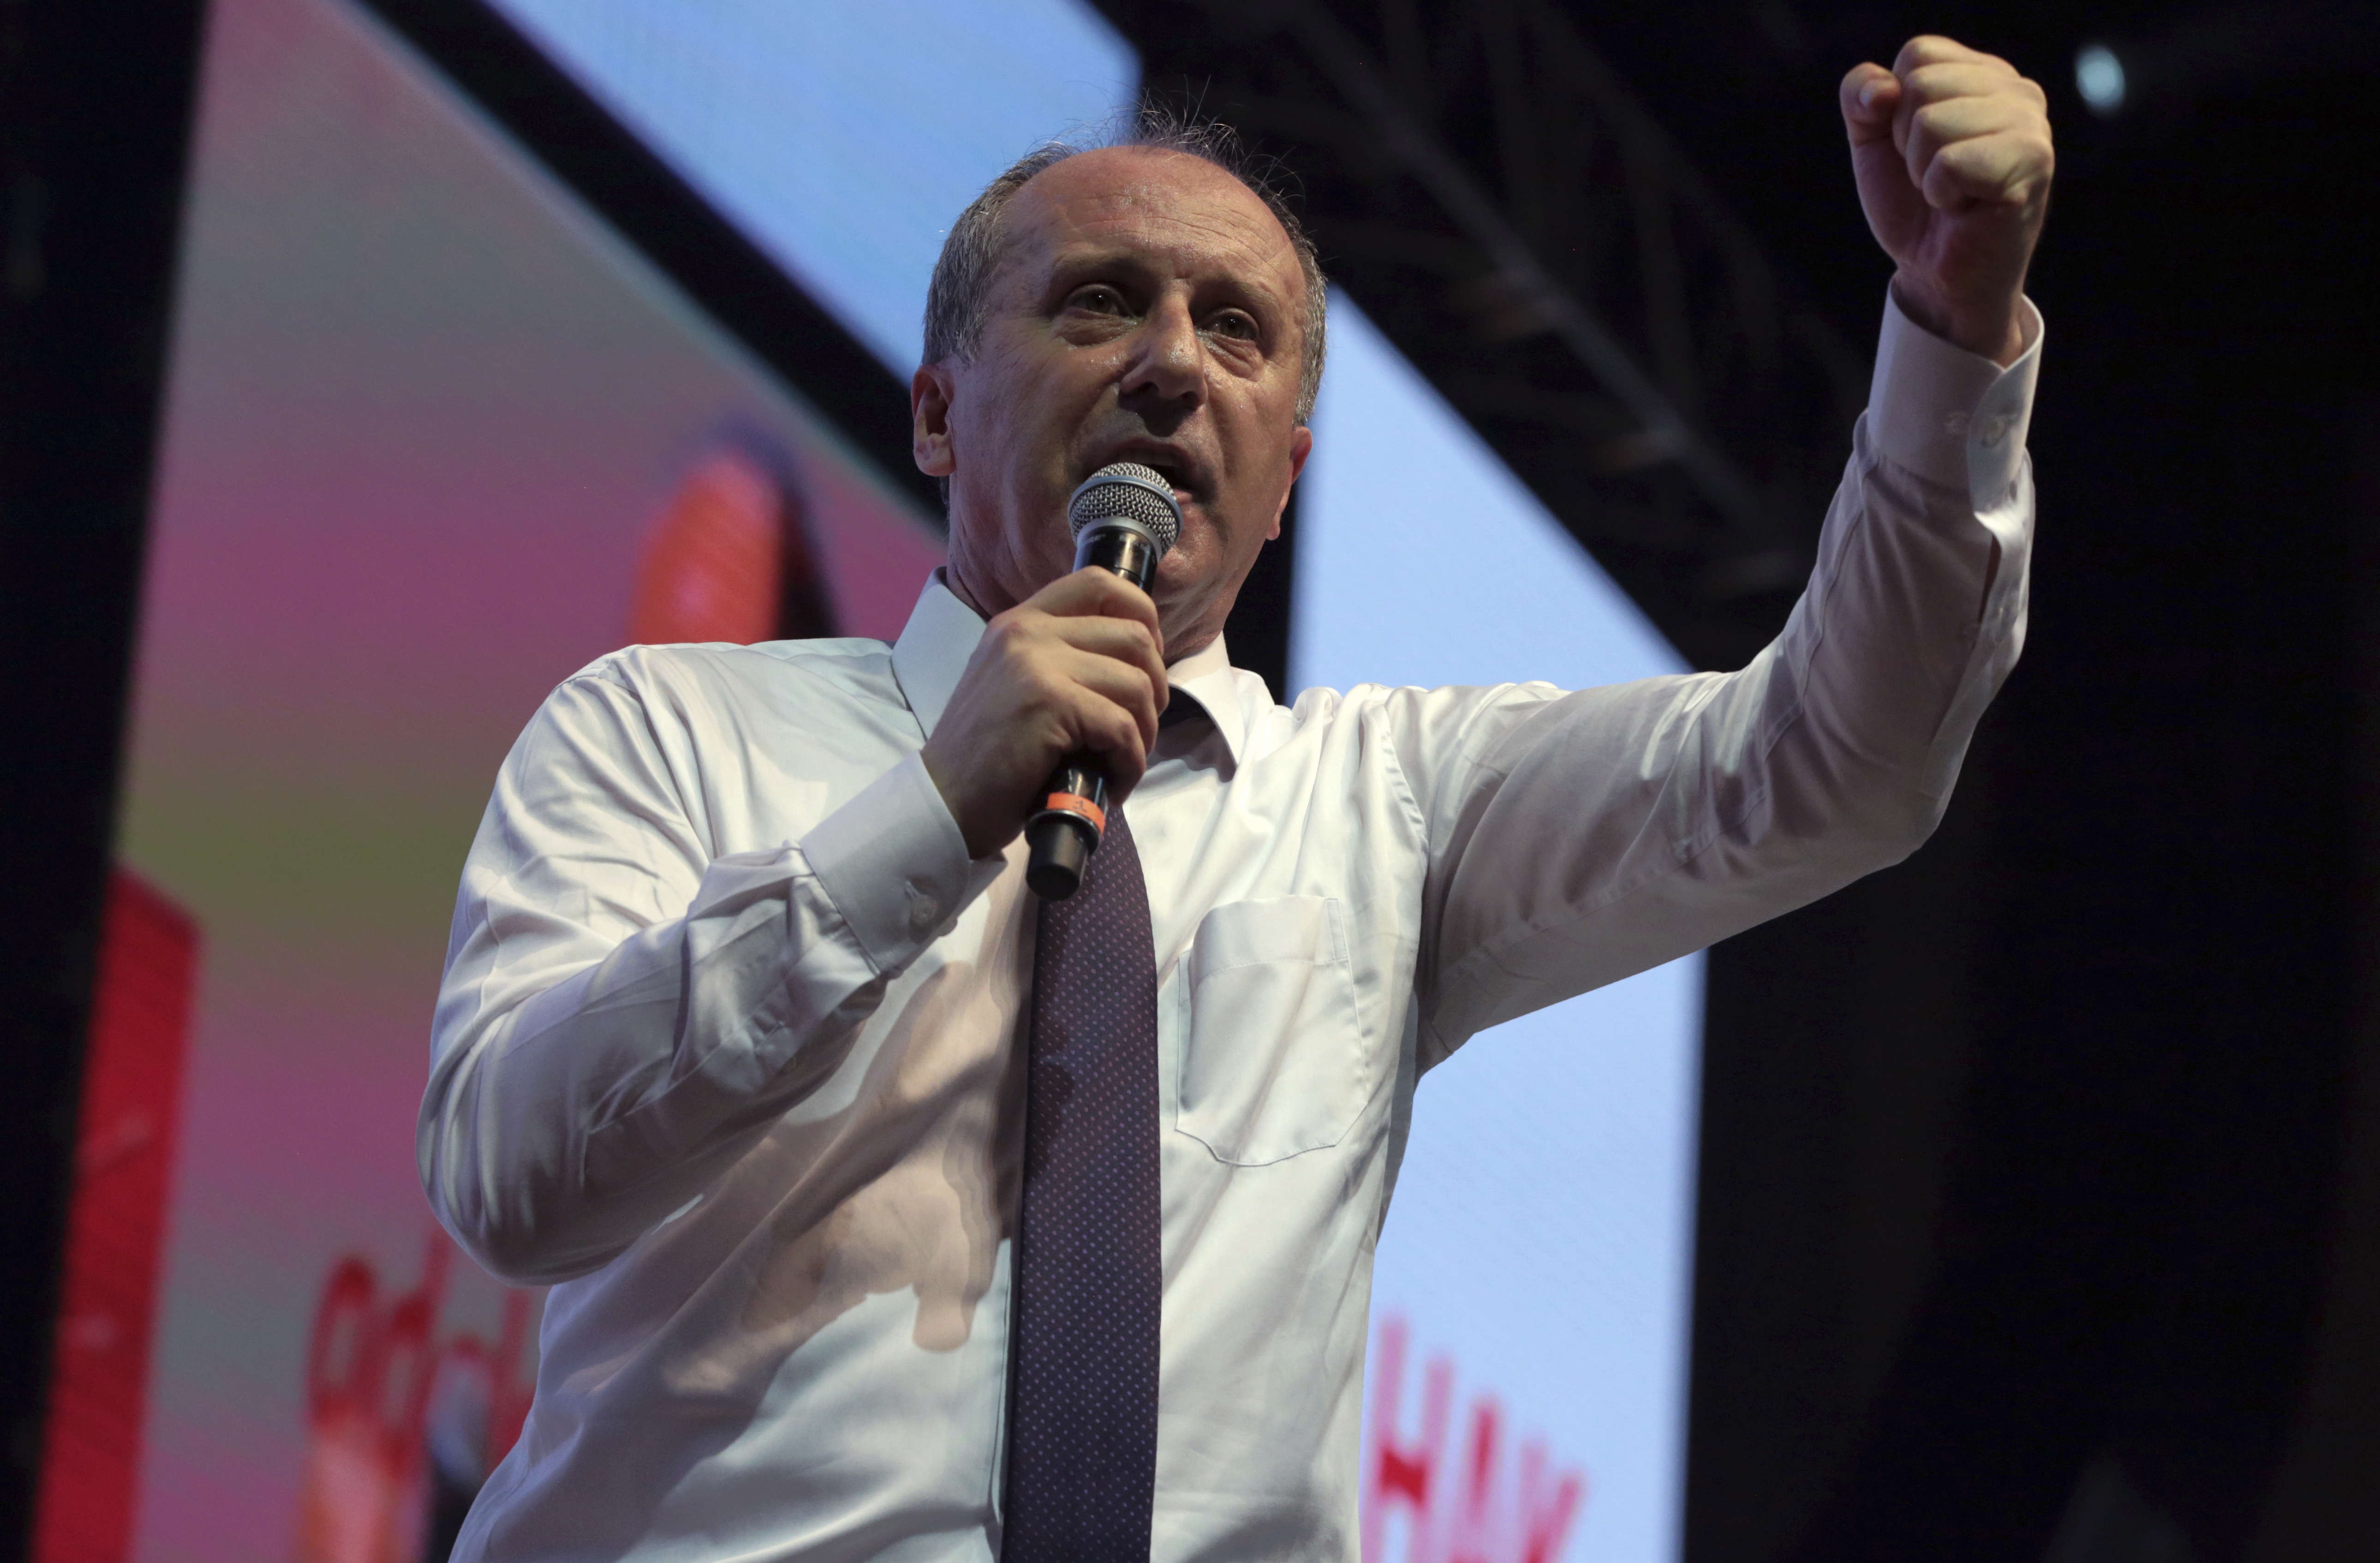 2018 Republican presidential candidate Muharrem Ince has vowed to run again. Source AP/ Burhan Ozbilici